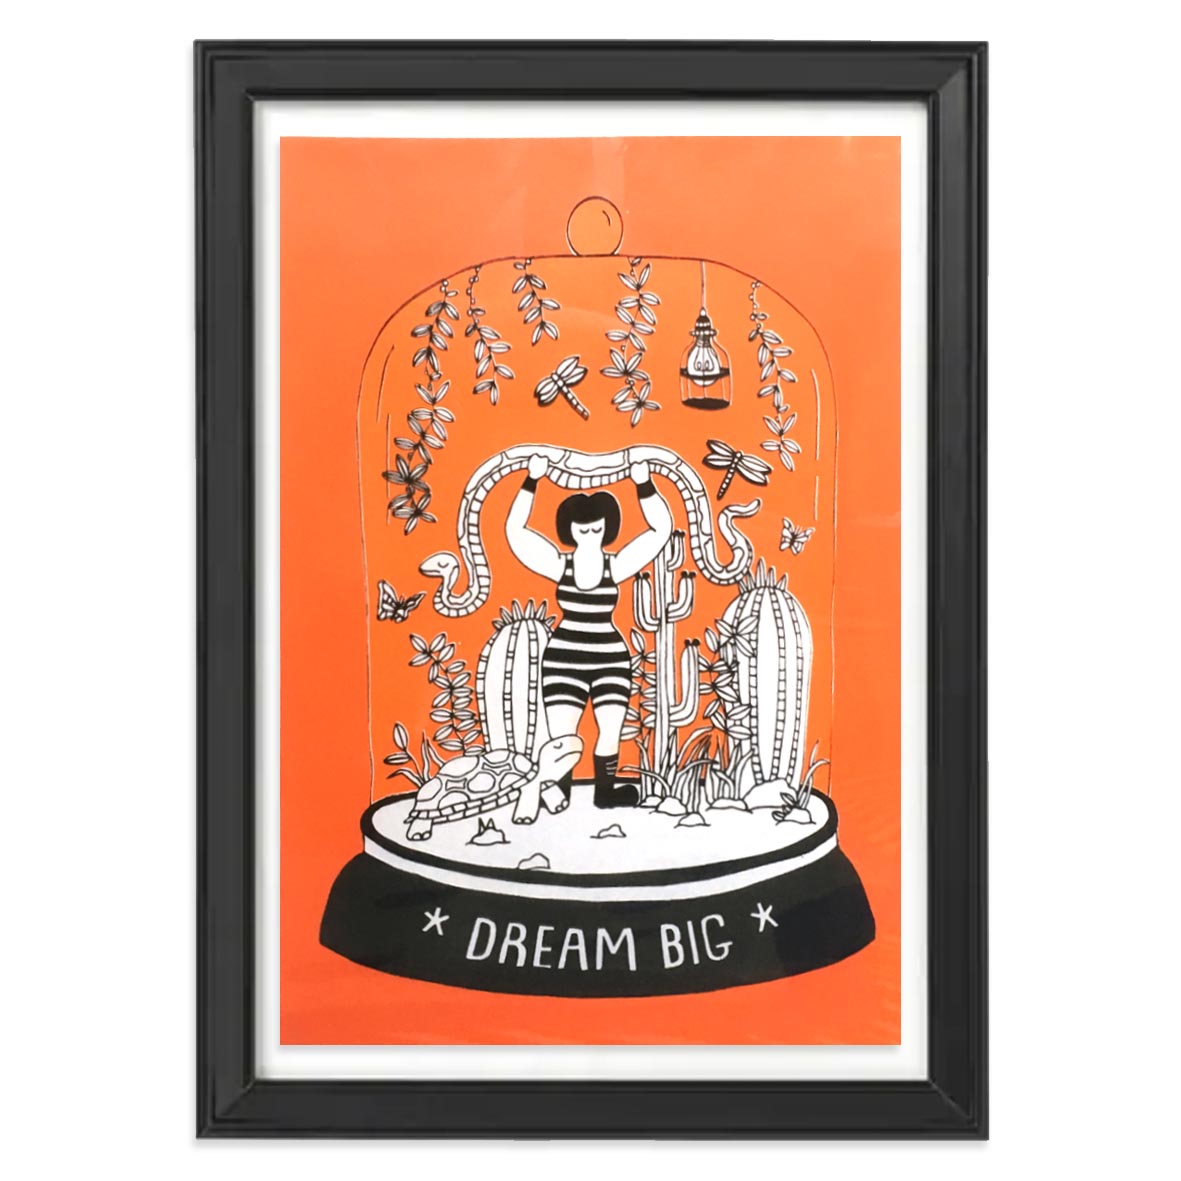 Dream Big screen print that was created for Colony of Artists